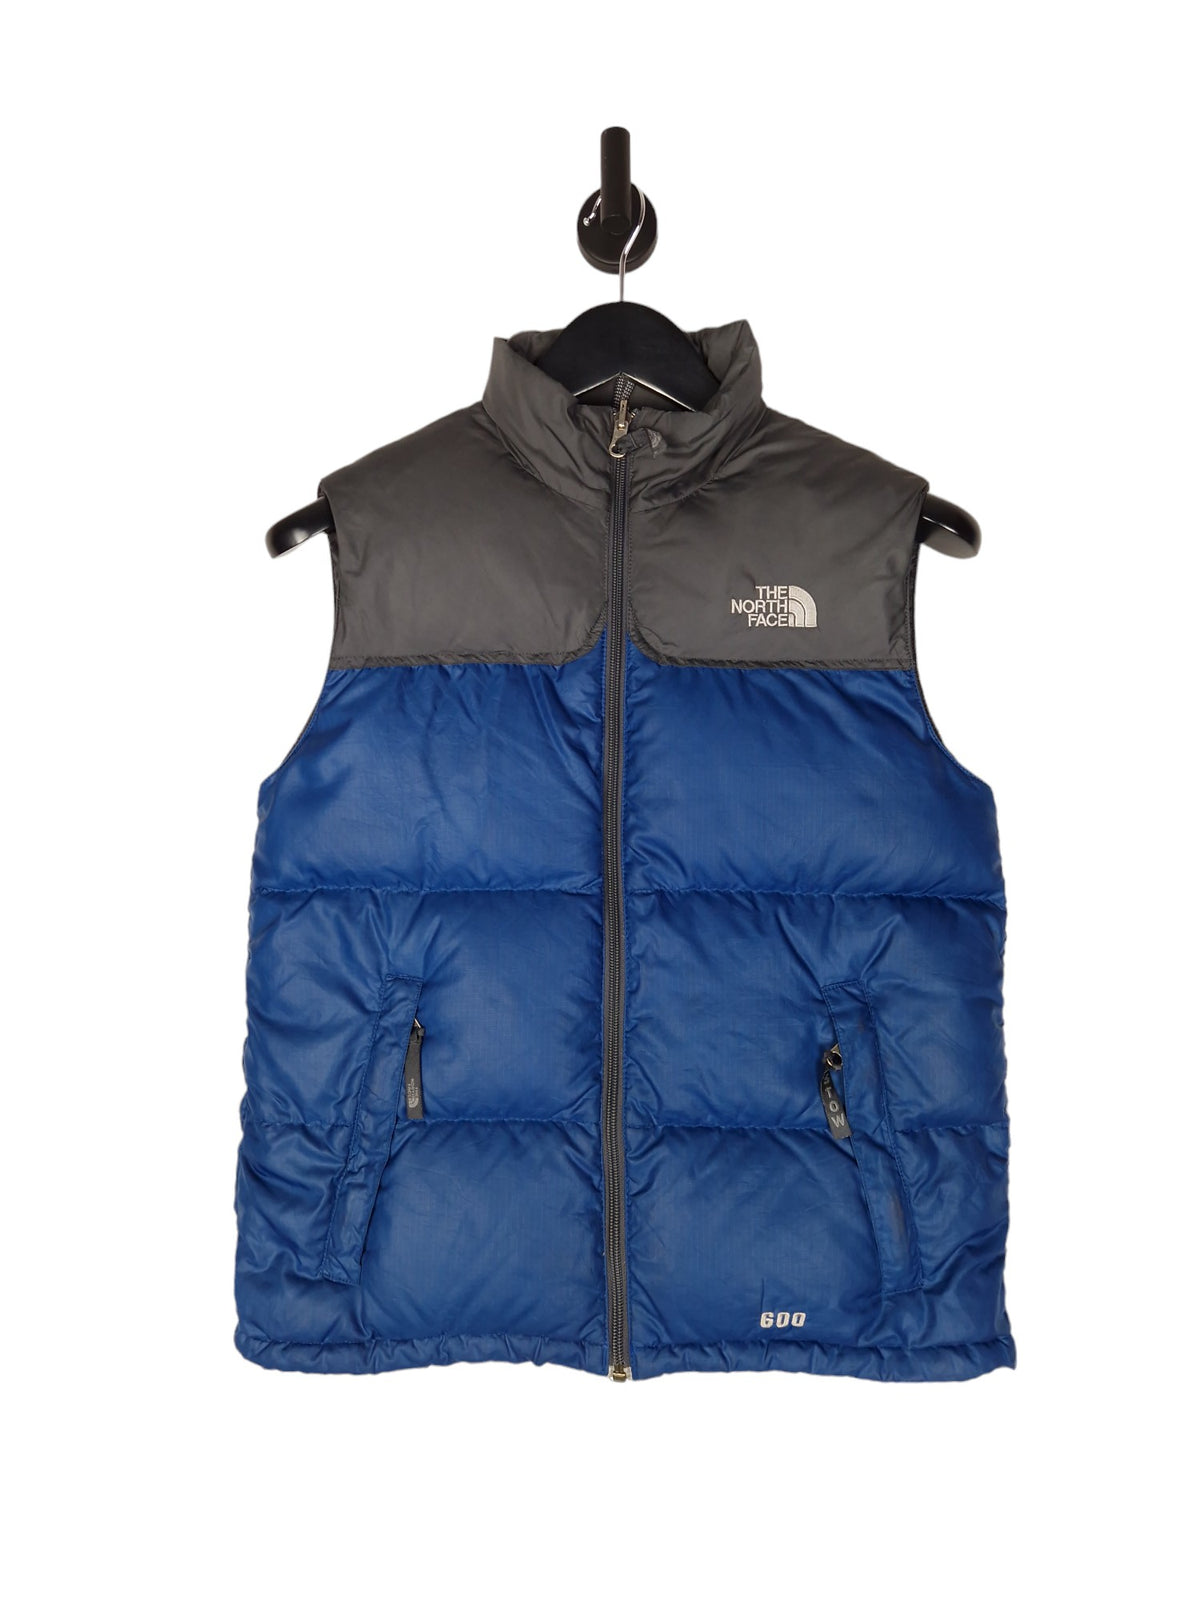 The North Face 600 Gilet - Size Large Boys